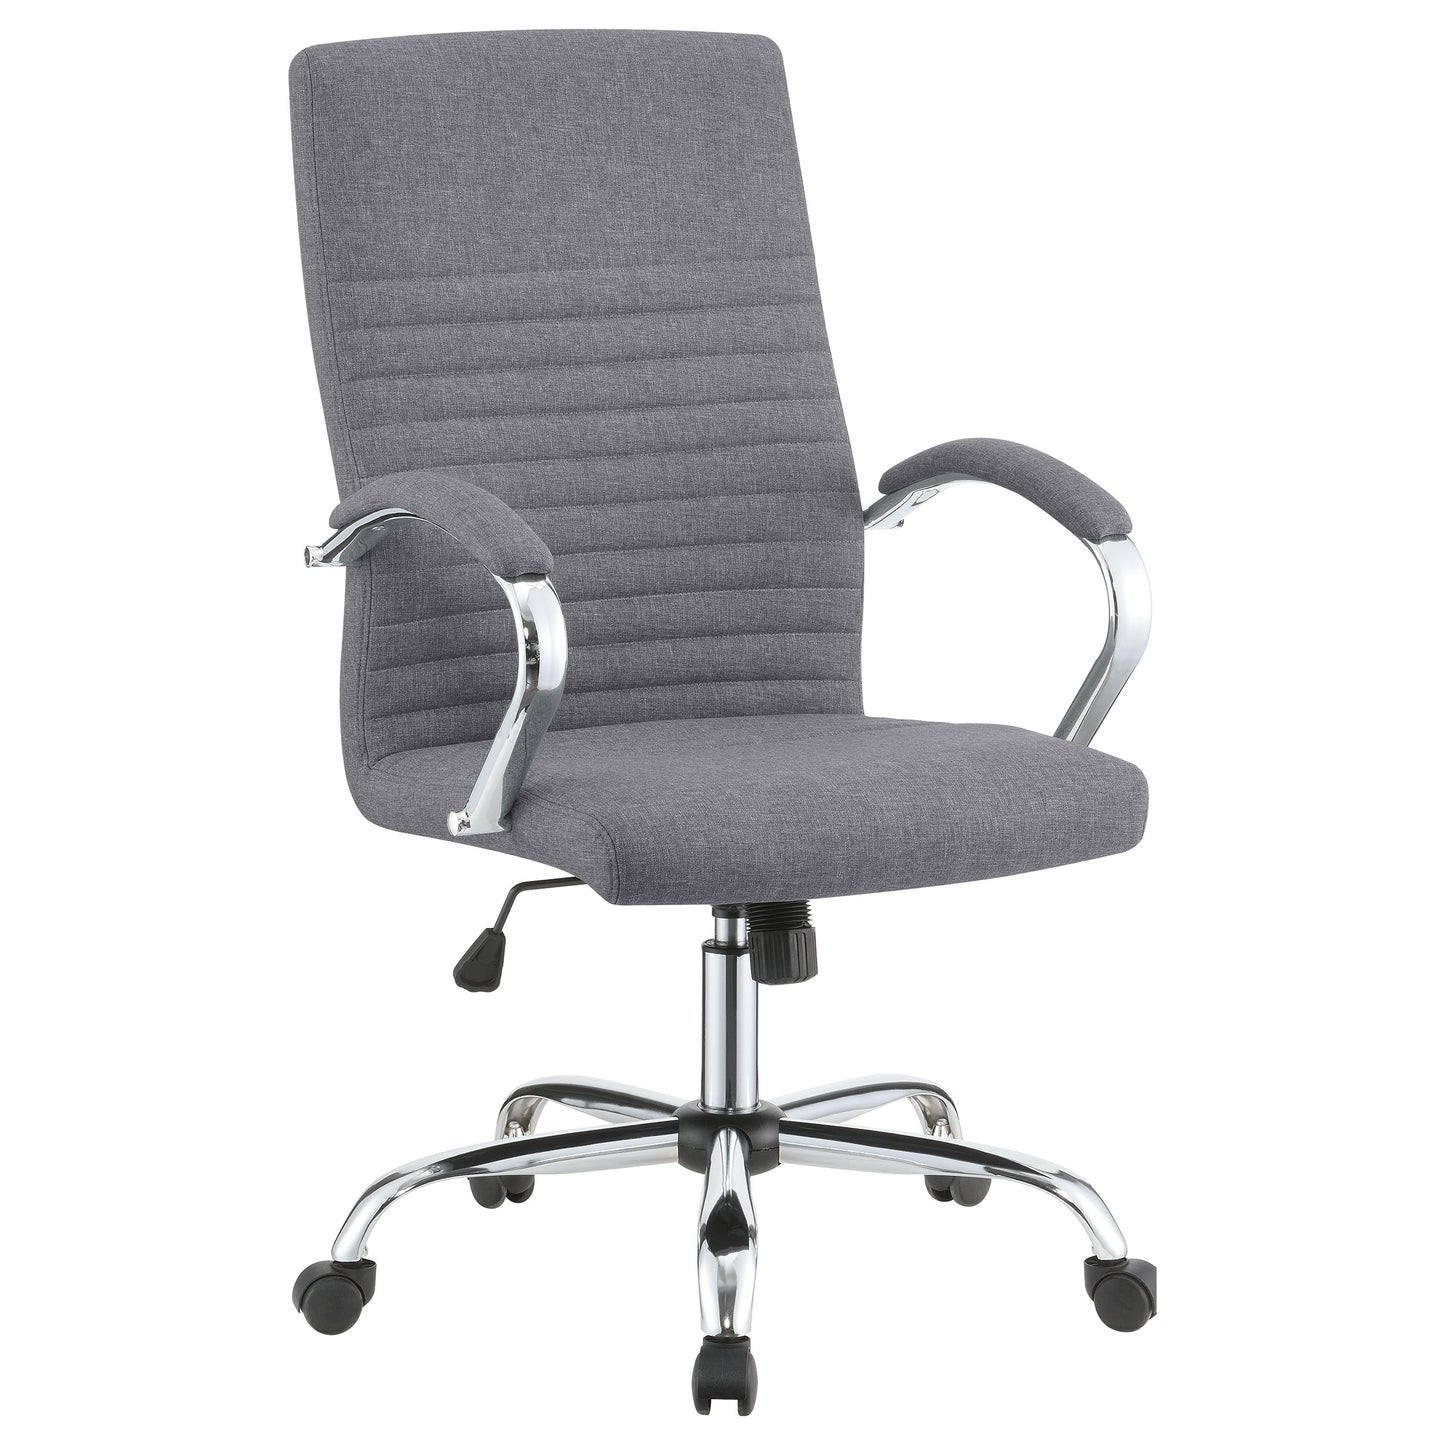 Abisko Upholstered Office Chair with Casters Grey and Chrome